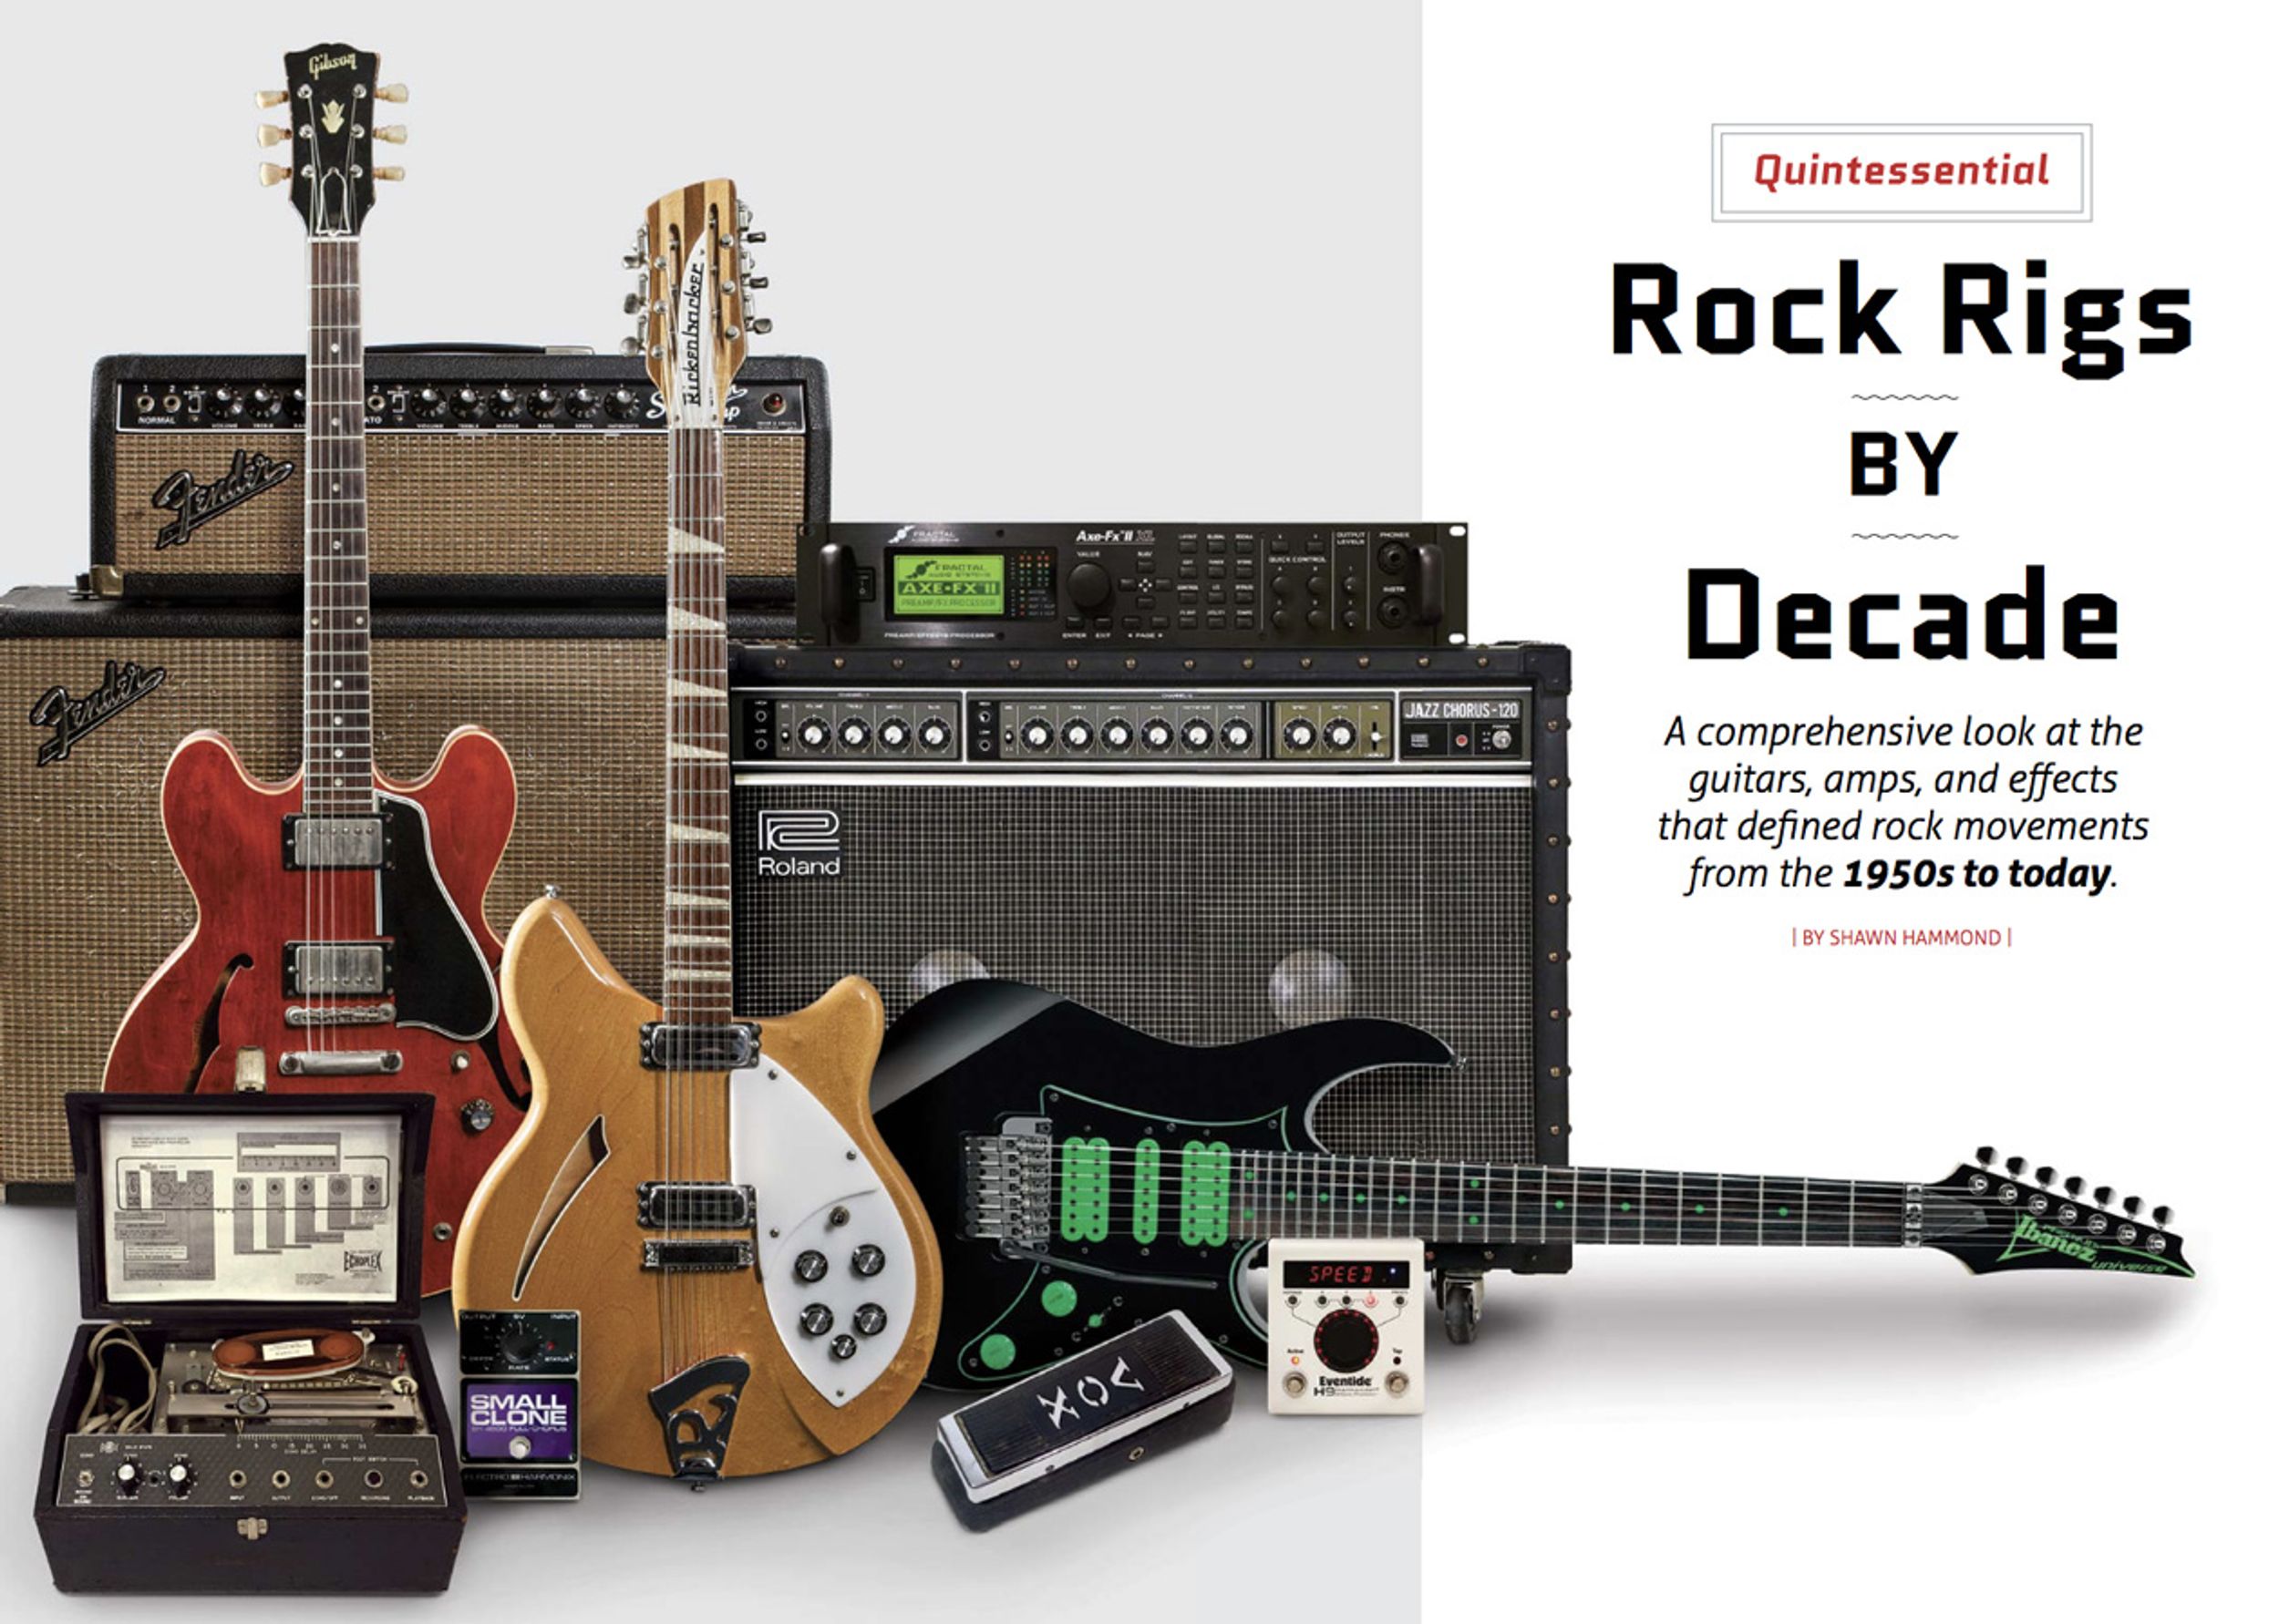 Quintessential Rock Rigs by Decade